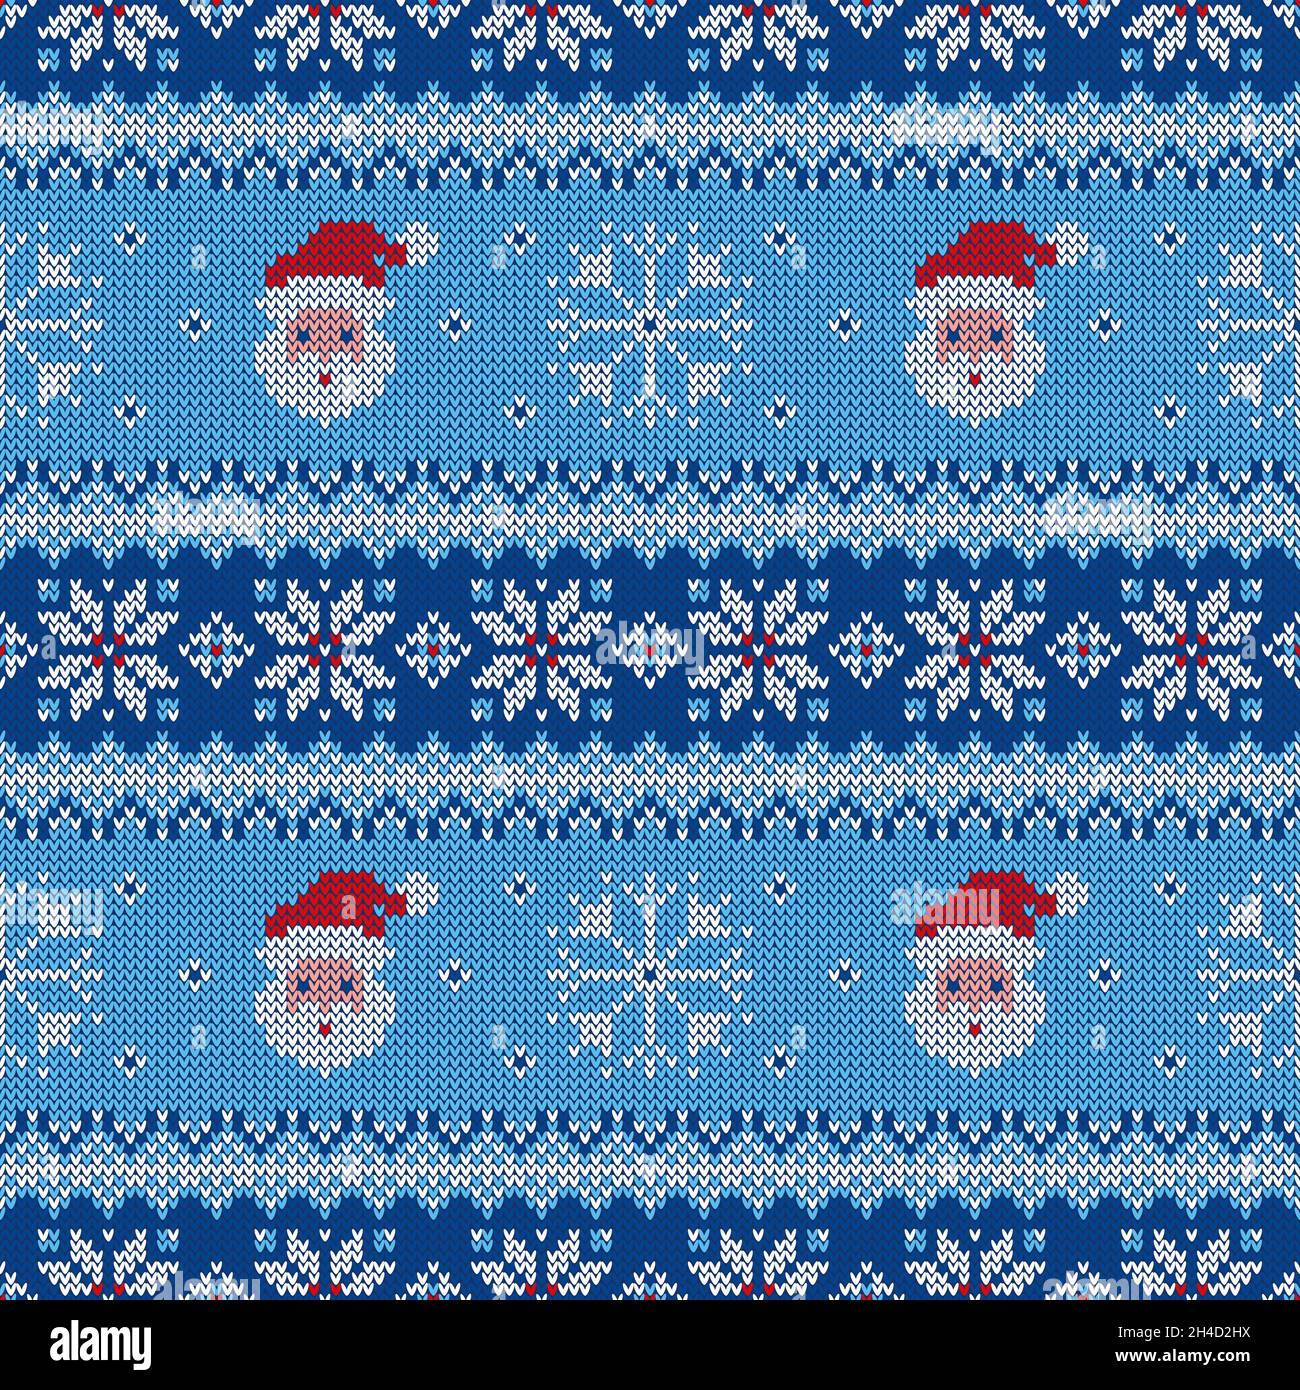 Knitted seamless pattern with Santa Clauses, snowflakes and scandinavian ornaments. Vector background. Blue, red and white sweater print. Stock Vector